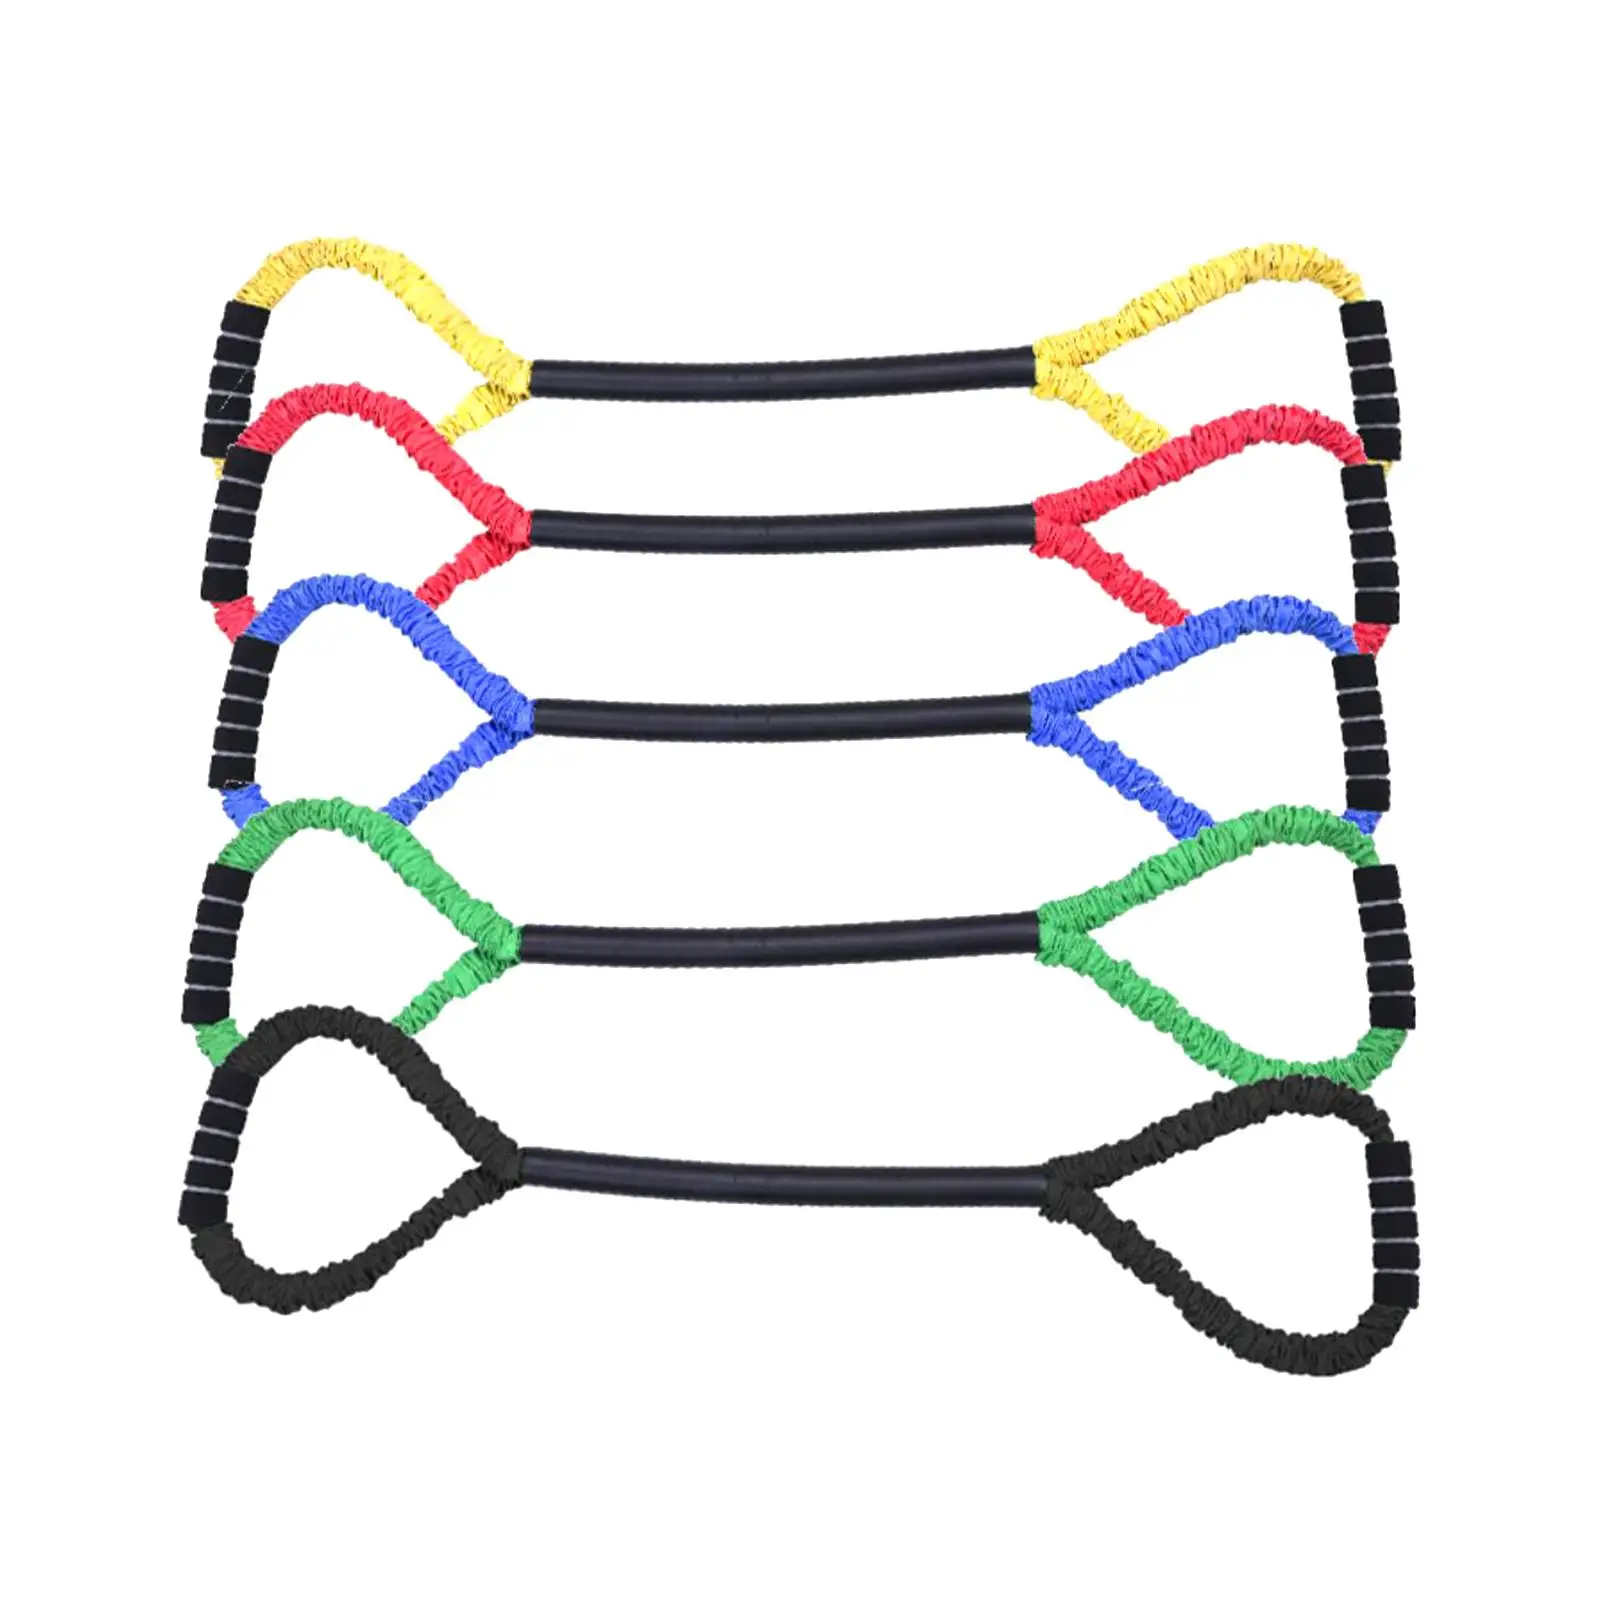 Boxing Resistance Band Exercise Bands Sports Resistance Bands Karate Training Elastic Bands Workout Equipment for Gym Training